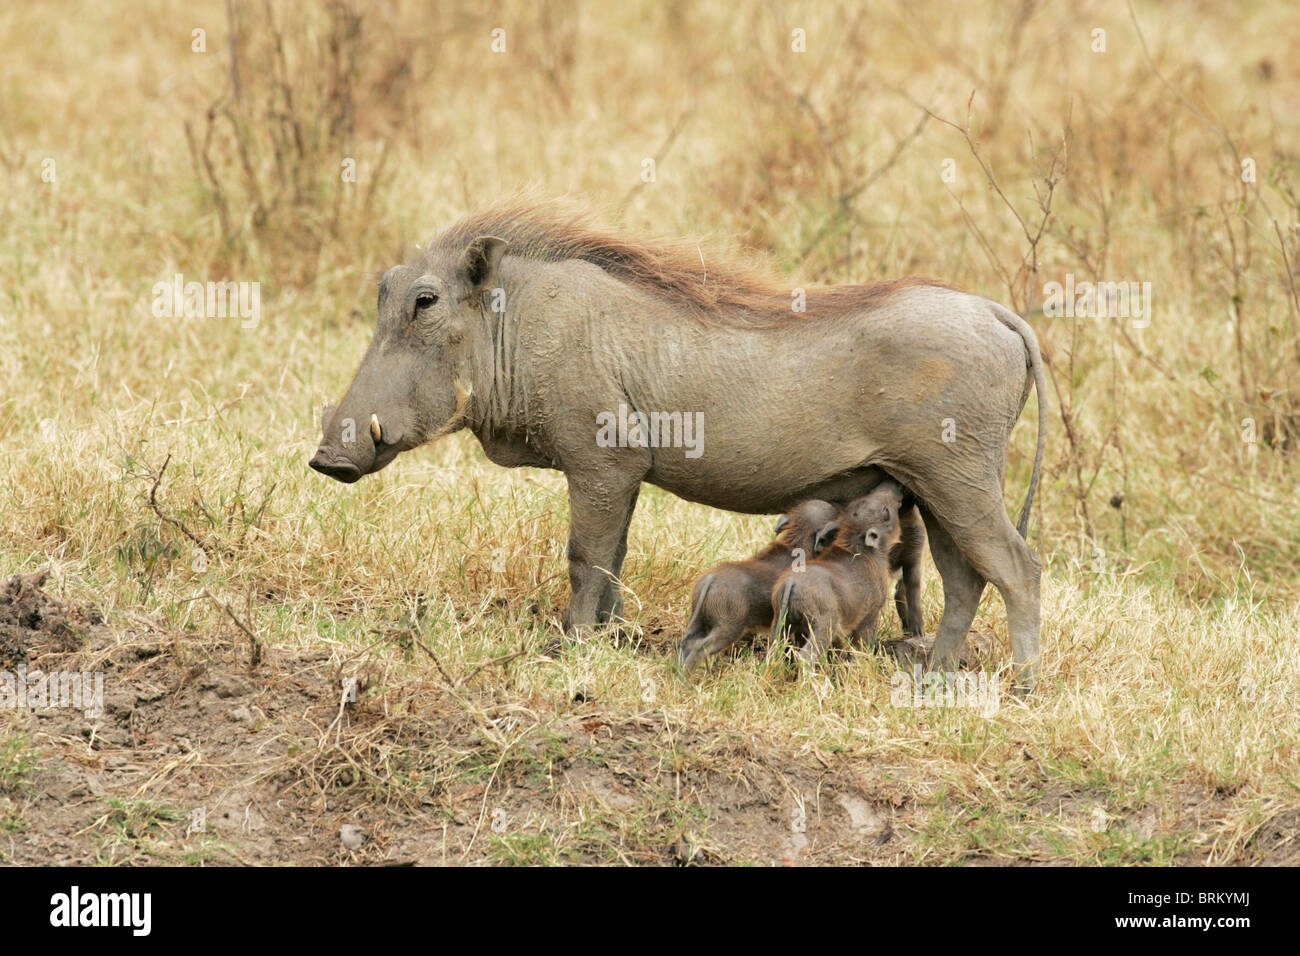 Two baby warthogs standing side by side suckling from their mother Stock Photo